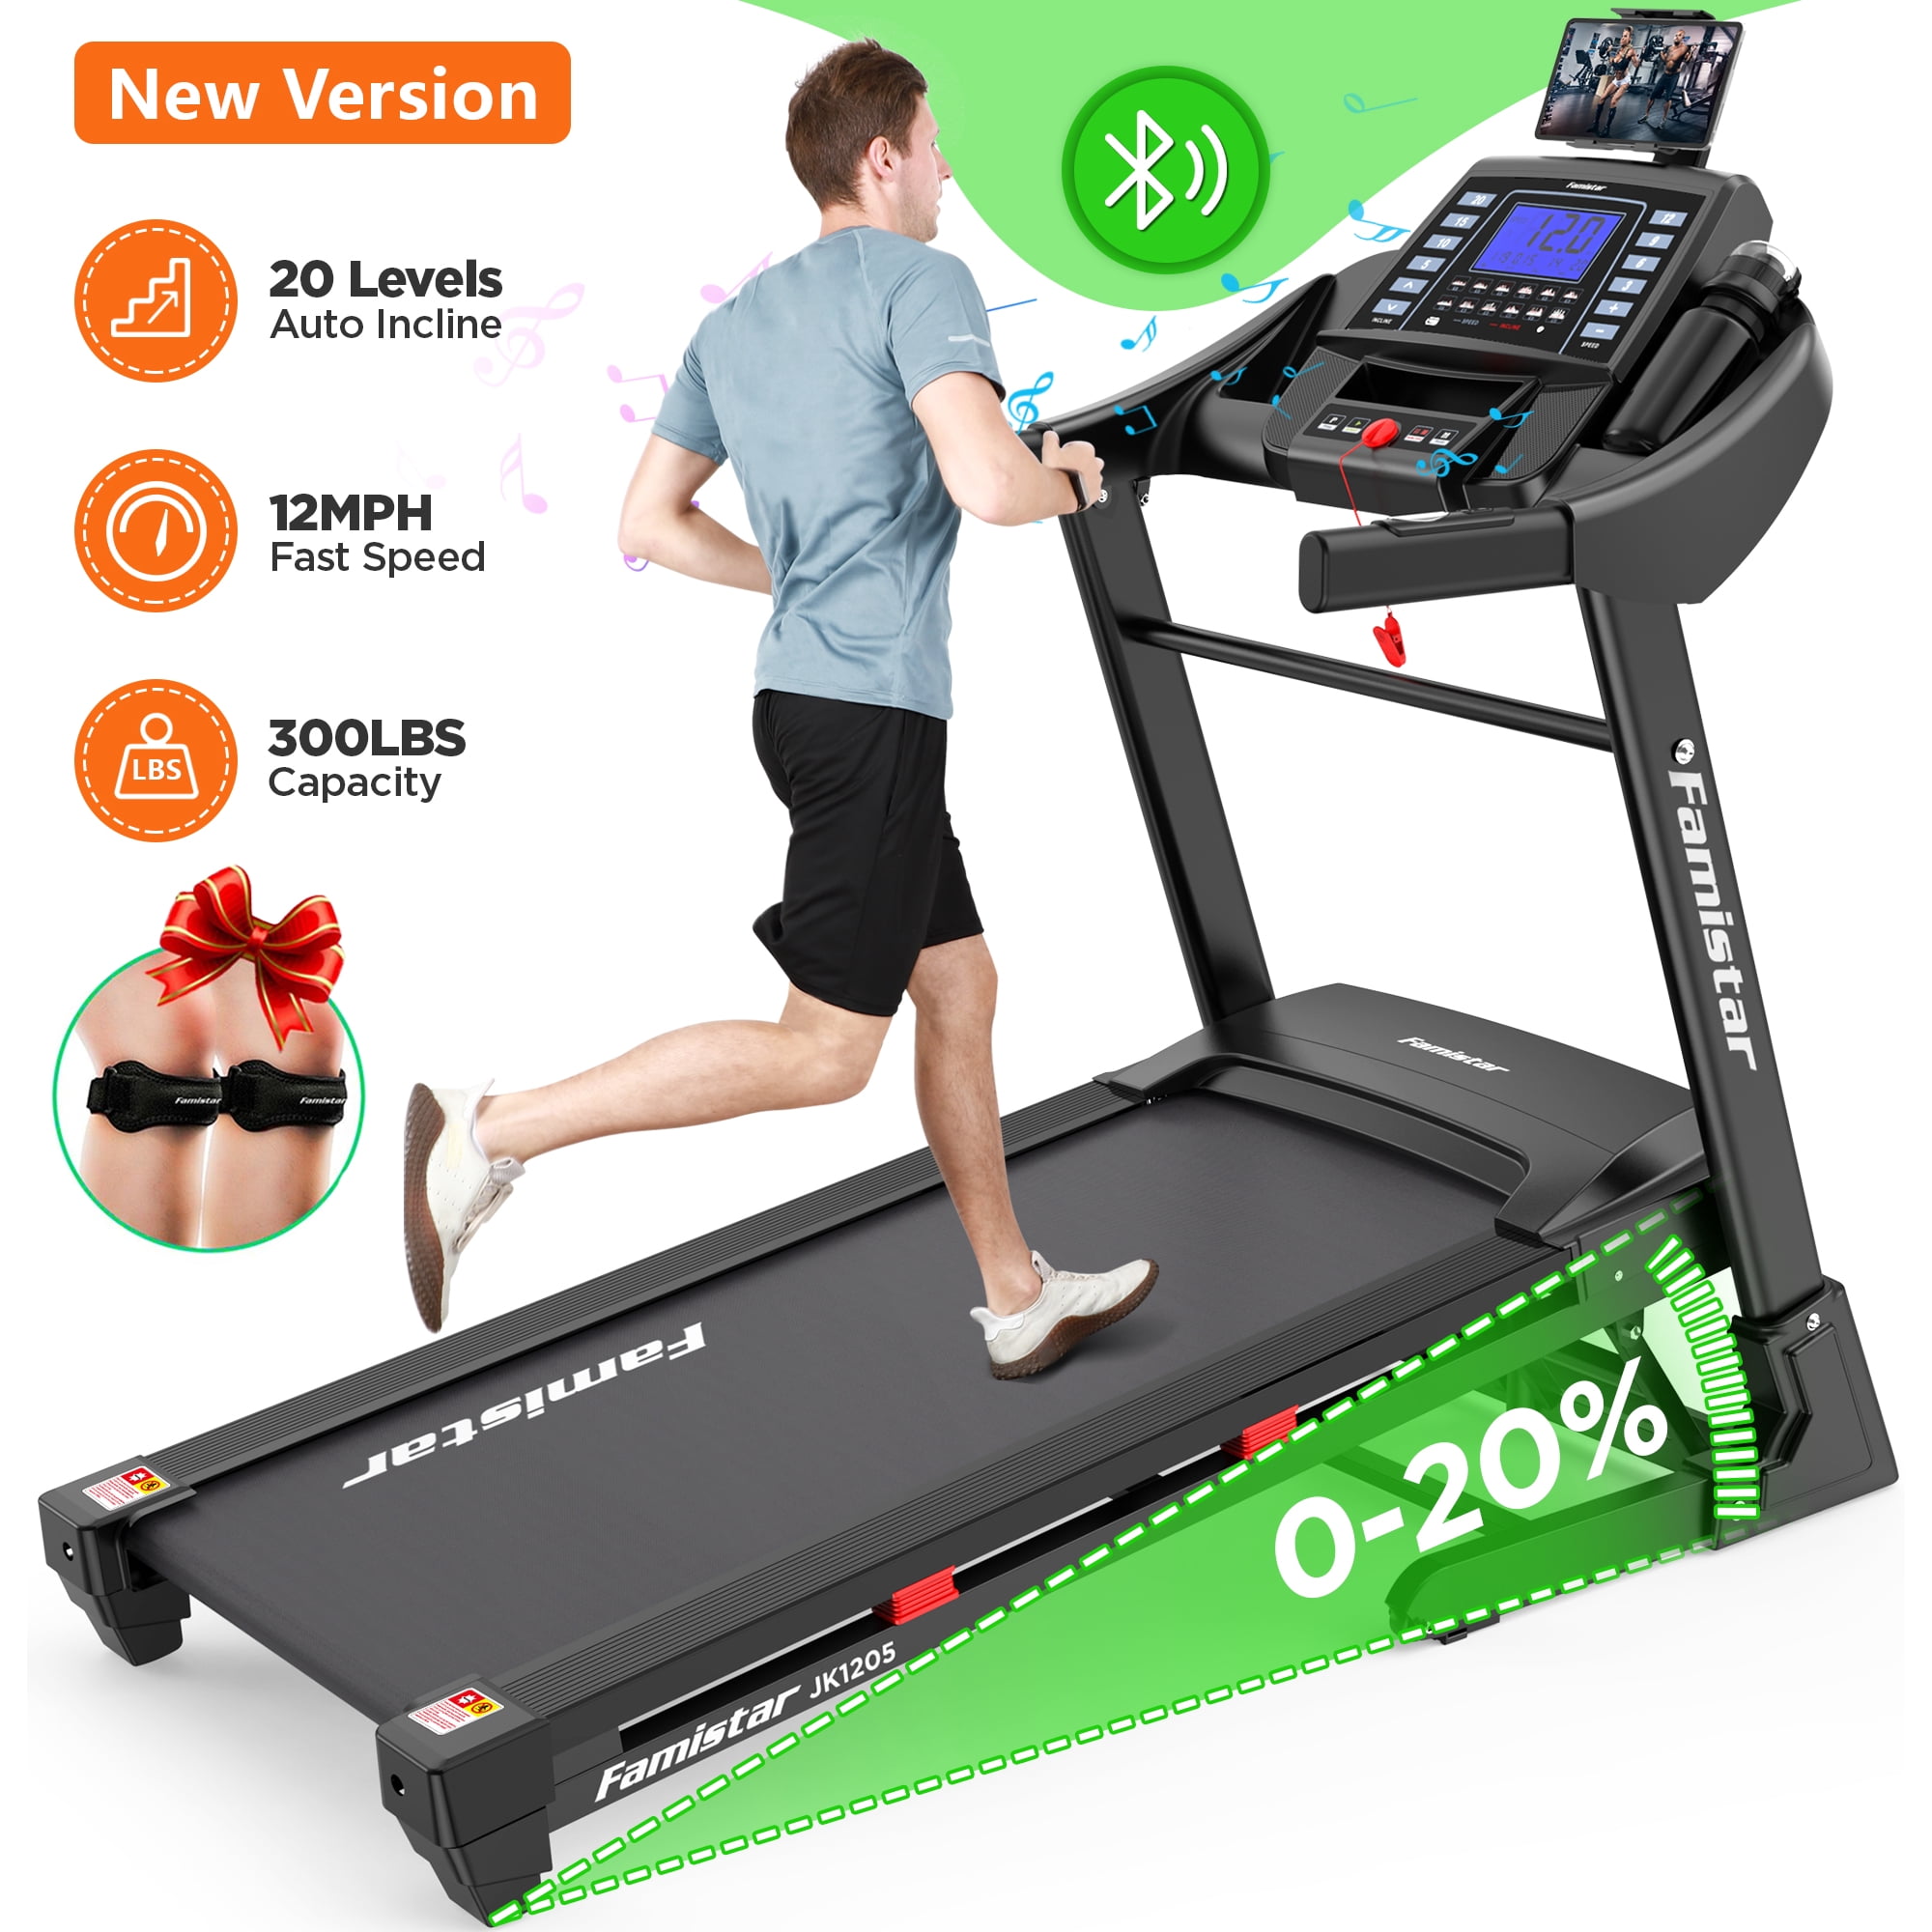 Famistar 4.0HP Clearance Folding Treadmill with 20 Levels Auto Incline, 300LB Capacity, 12MPH Speed Controls